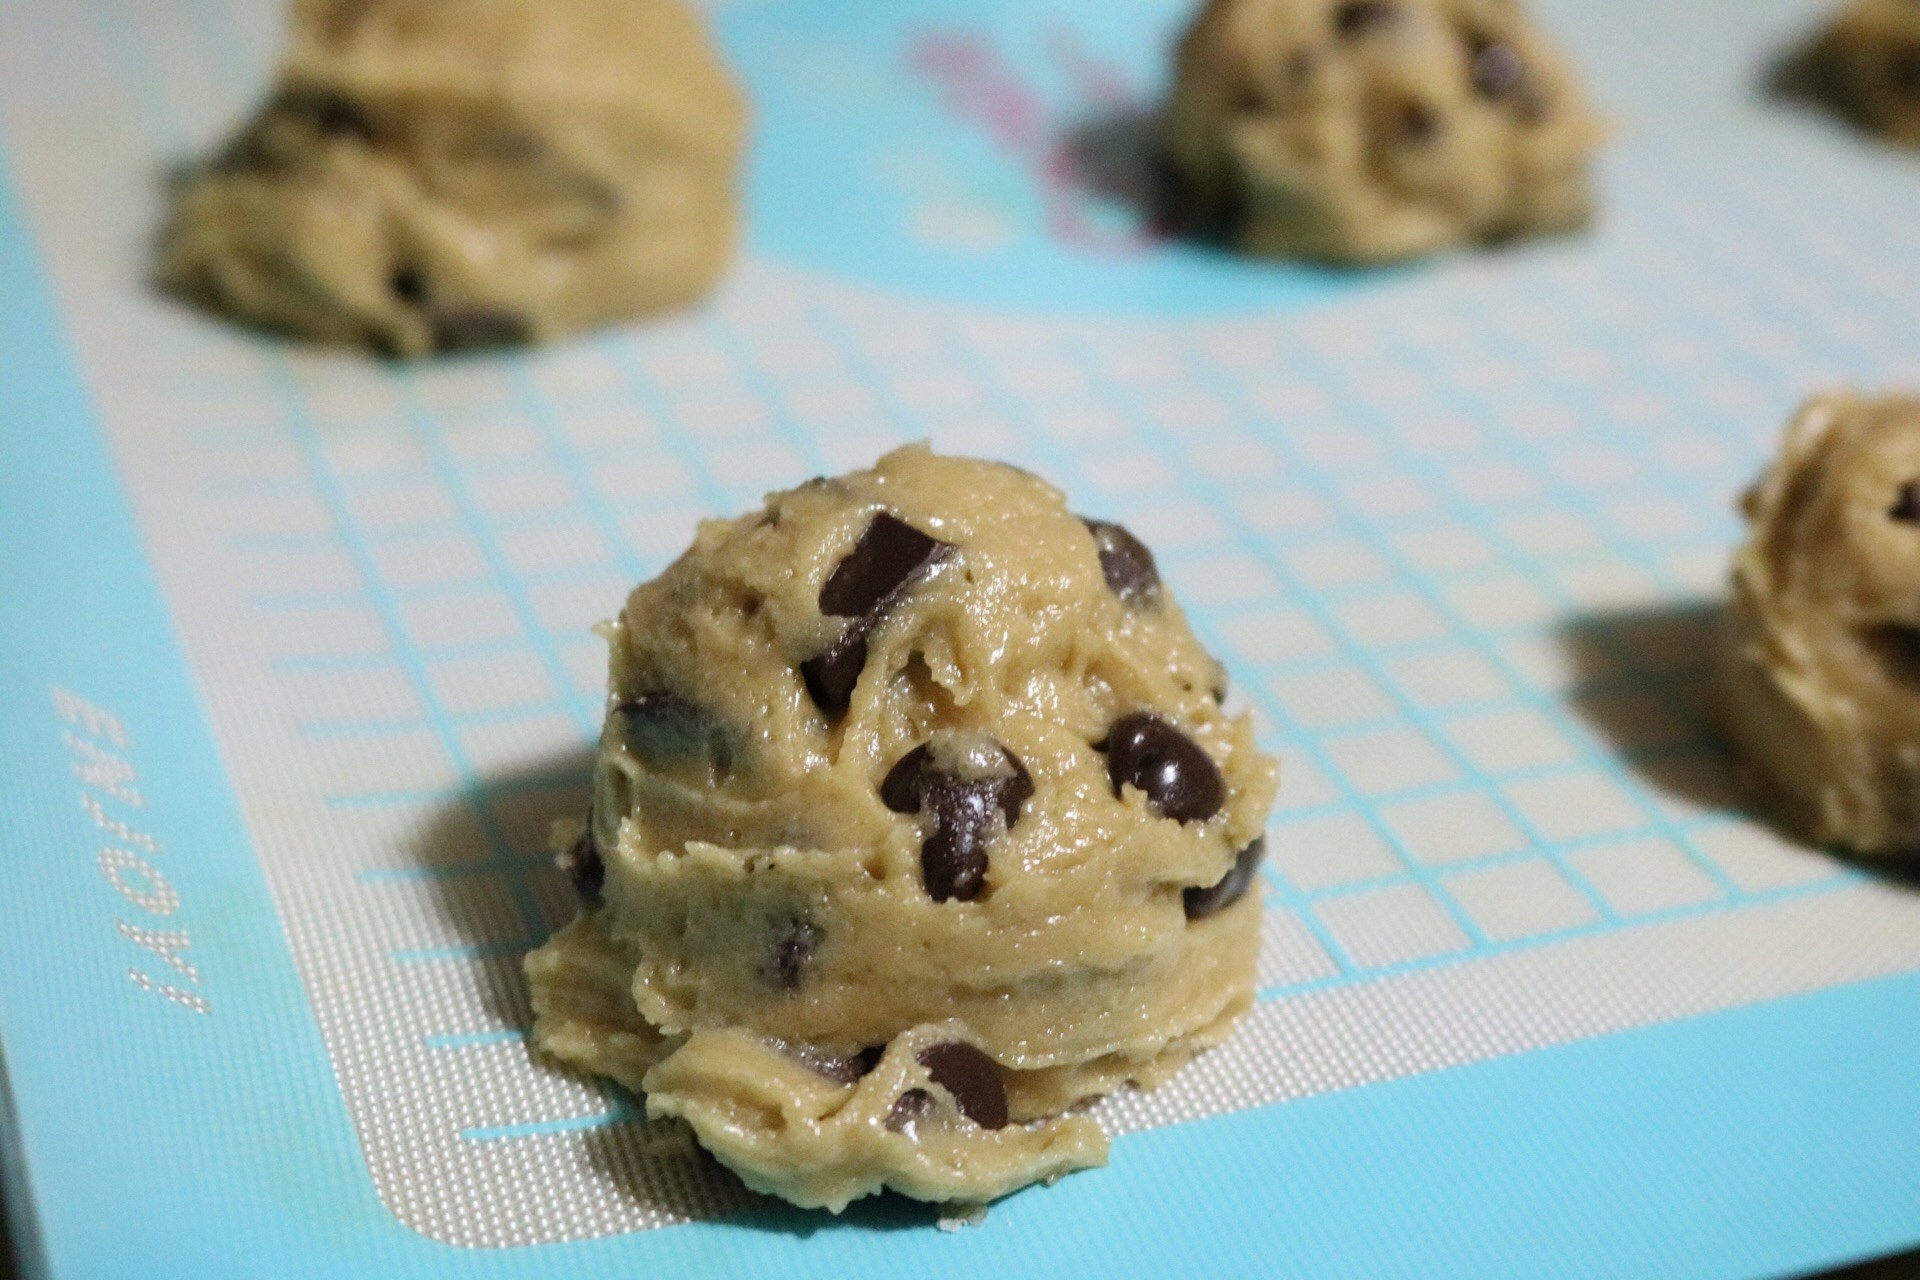 A close-up of a round-shaped mound of cookie dough on a silicone baking sheet along with more mounds of cookie dough in the background